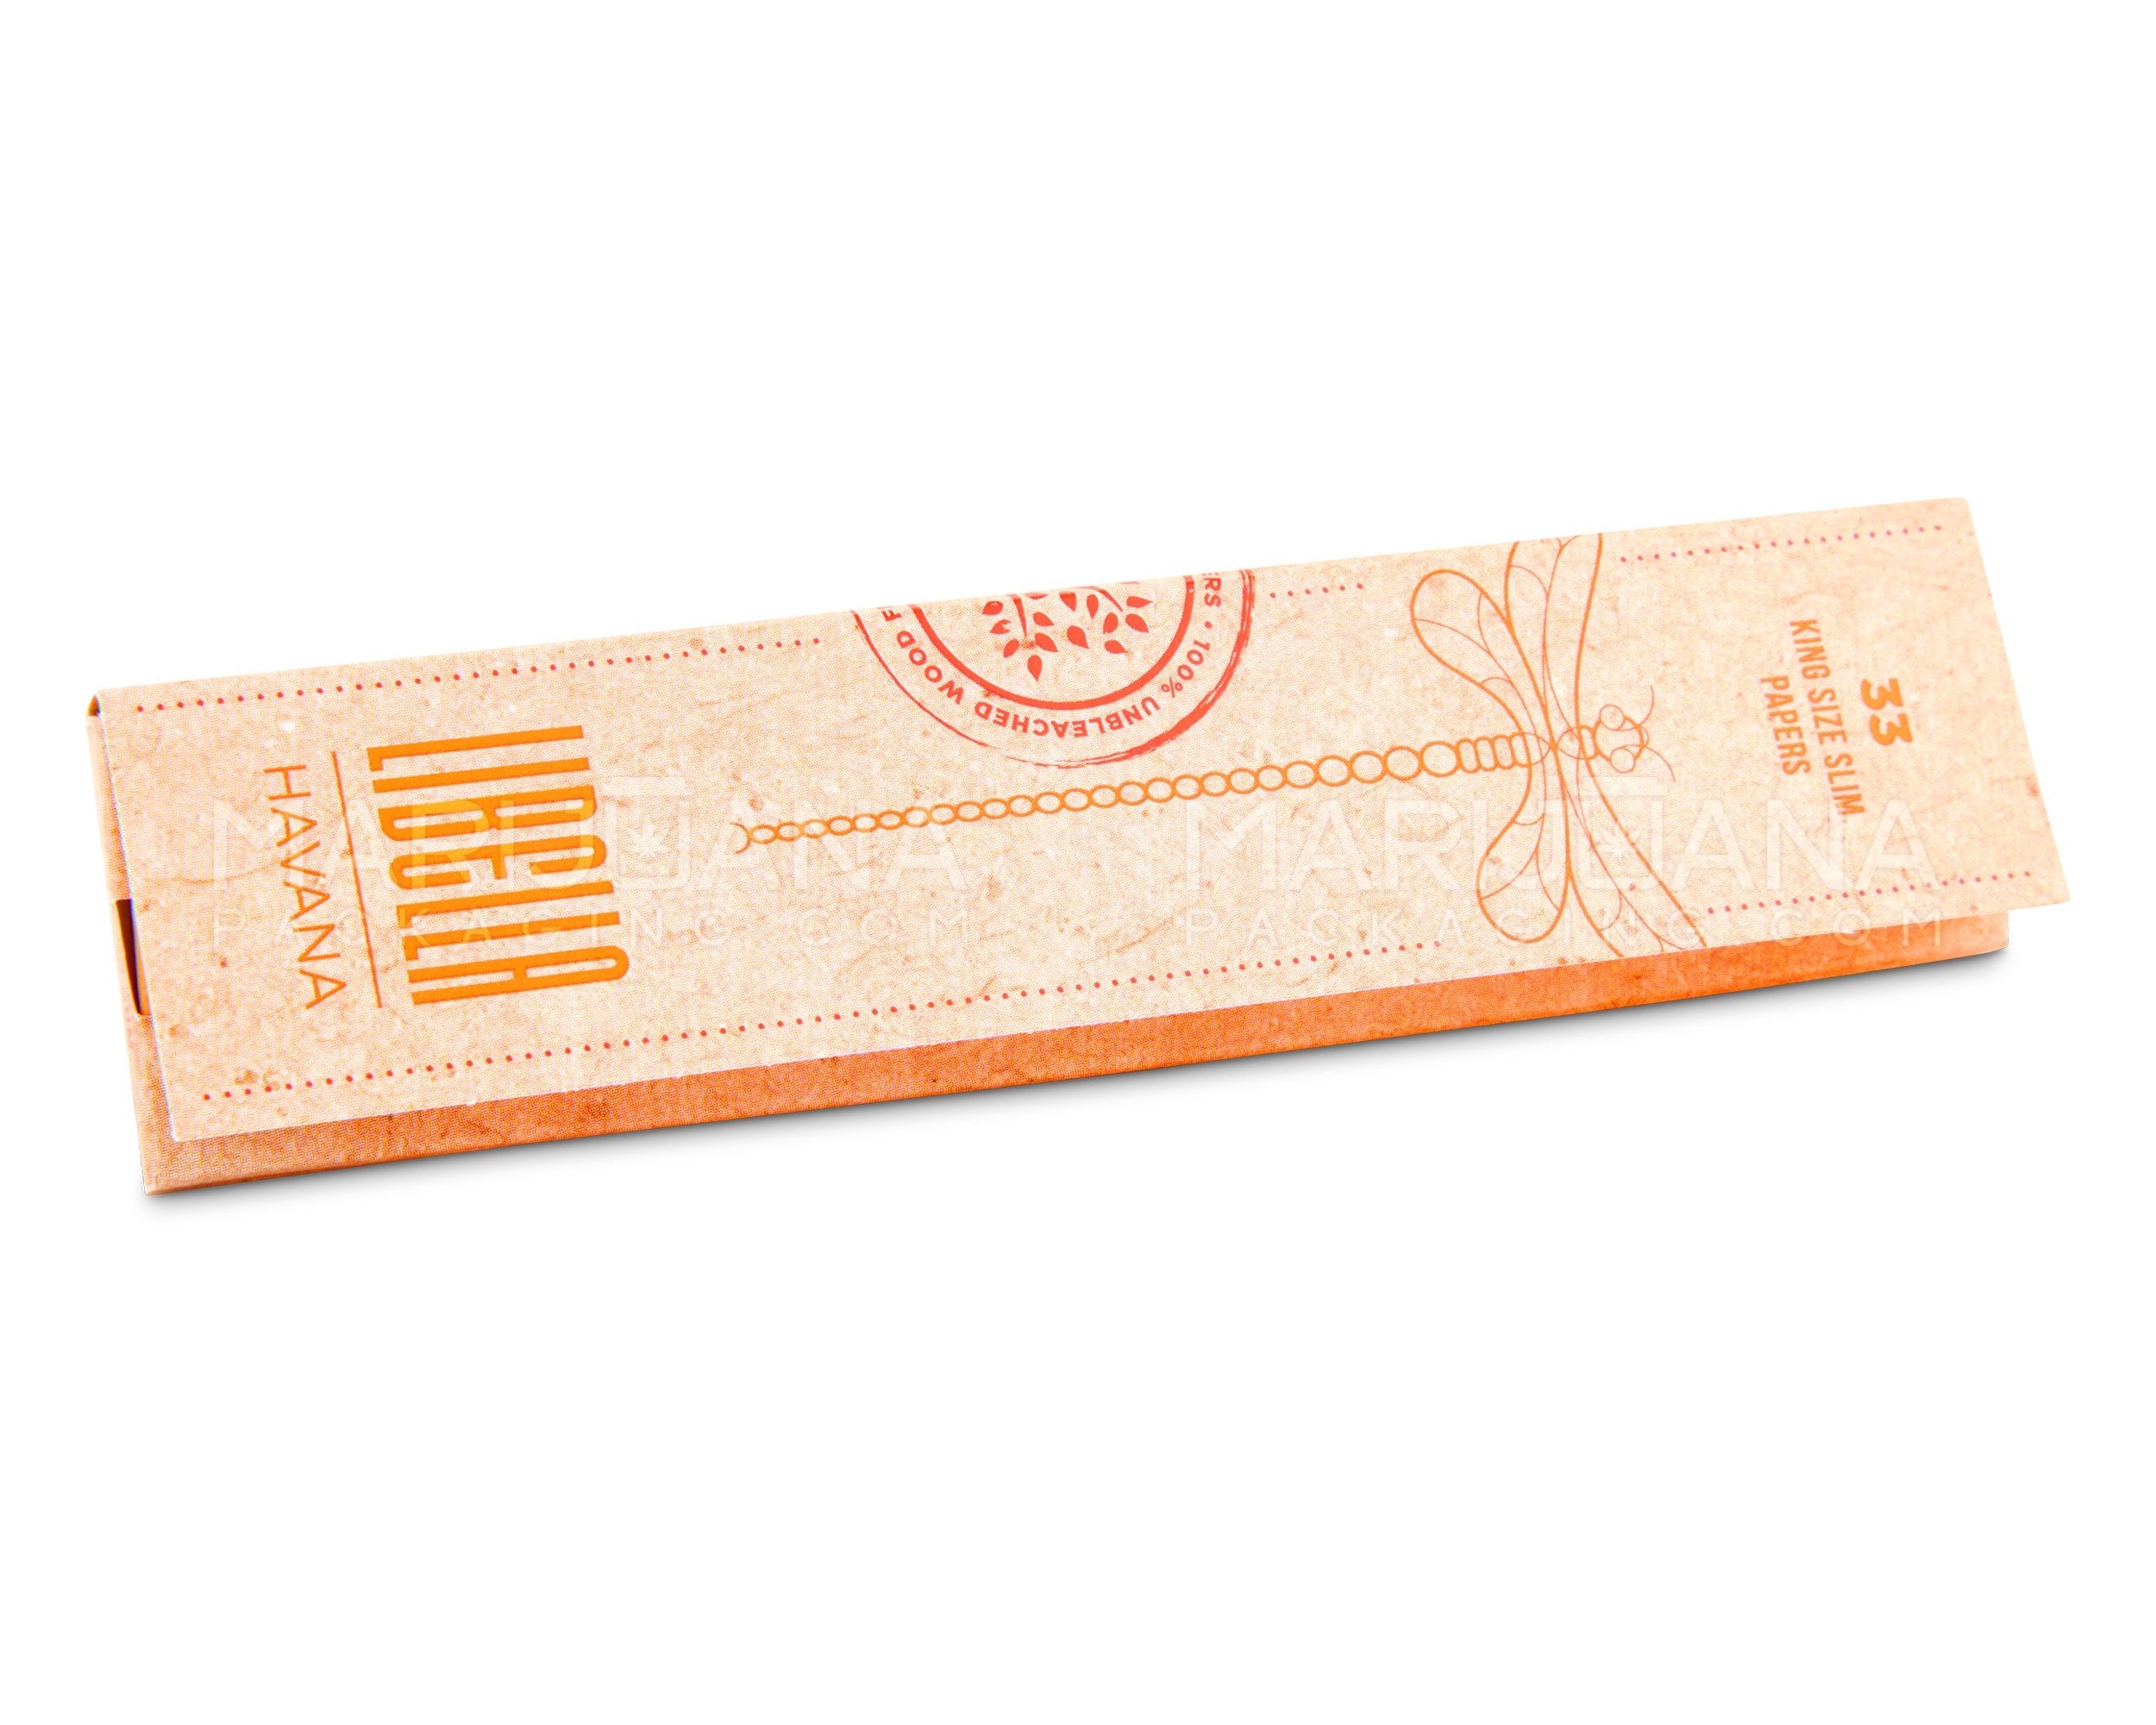 LIBELLA | 'Retail Display' King Size Slim Natural Unbleached Rolling Papers | 108mm - Havana - 50 Count - 3